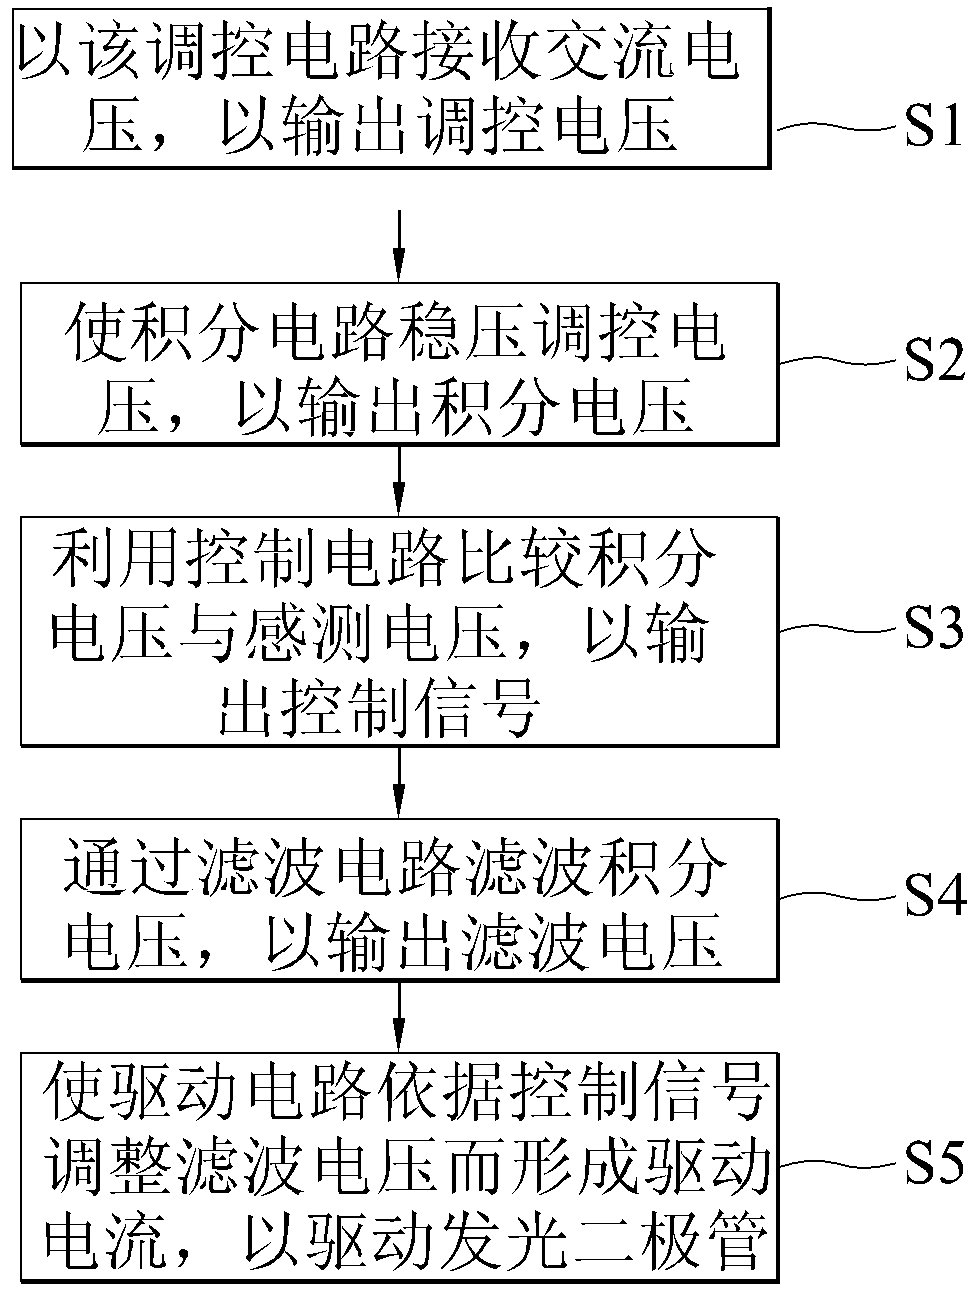 Led driving device and method thereof